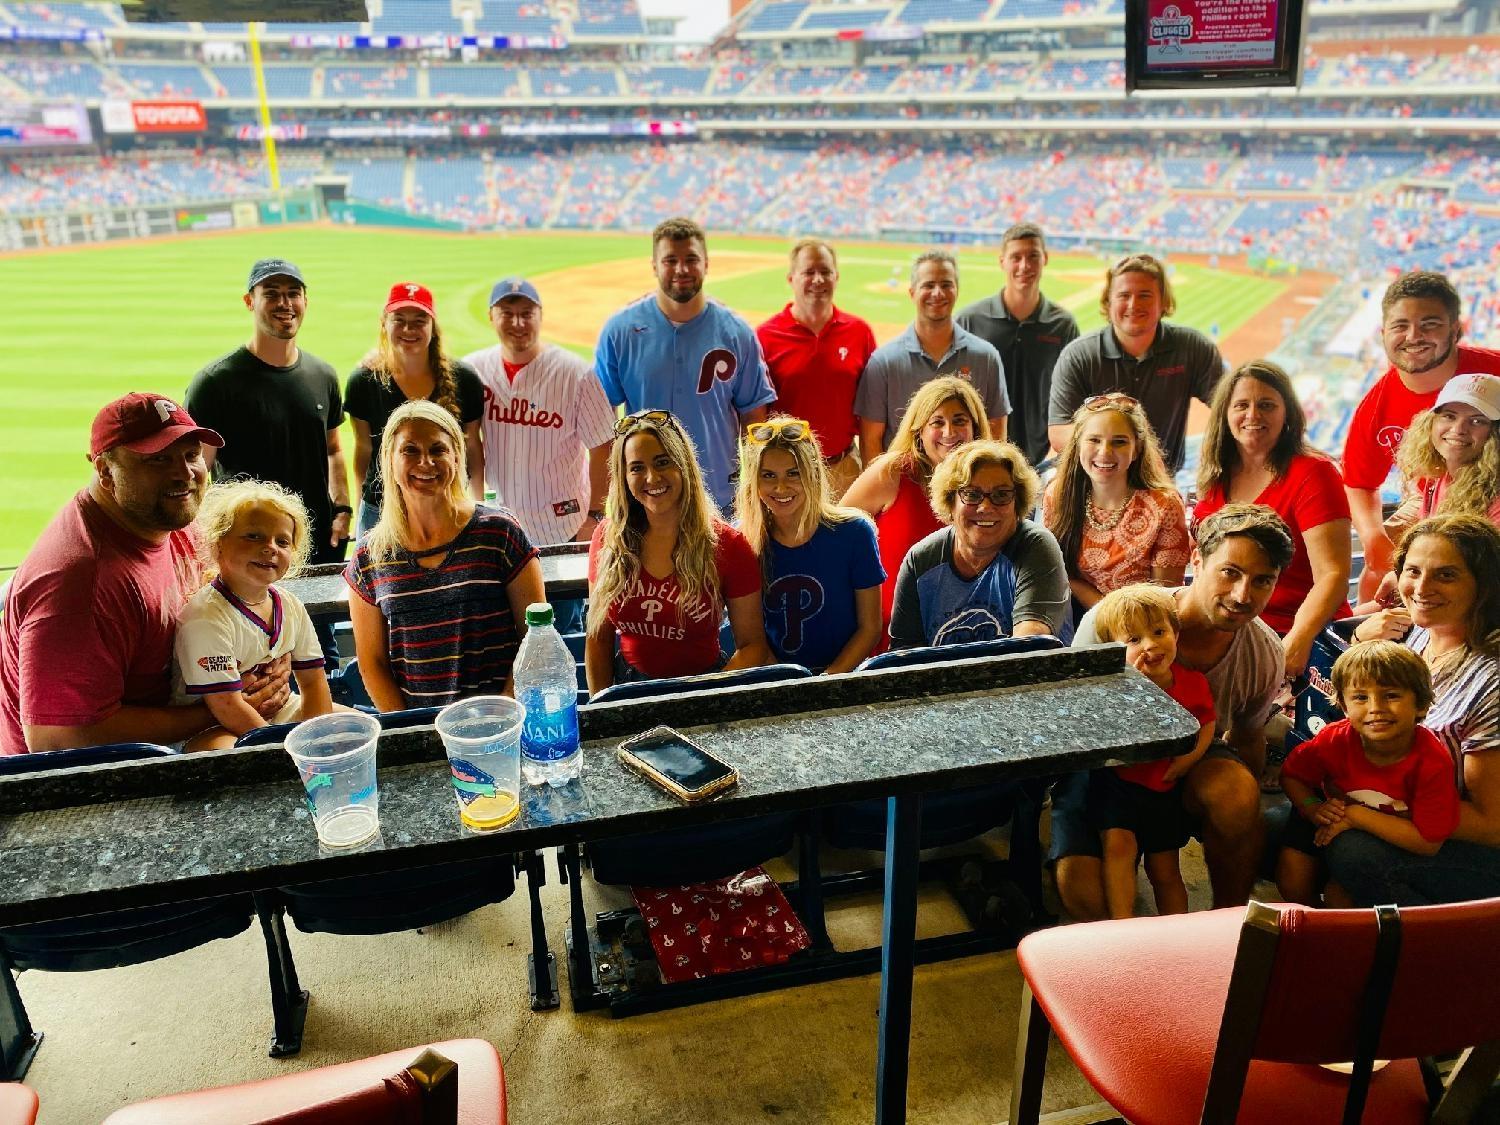 James Schmid, Chief Investment Officer & Managing Partner, and the team enjoying a Phillies verses Nationals game.